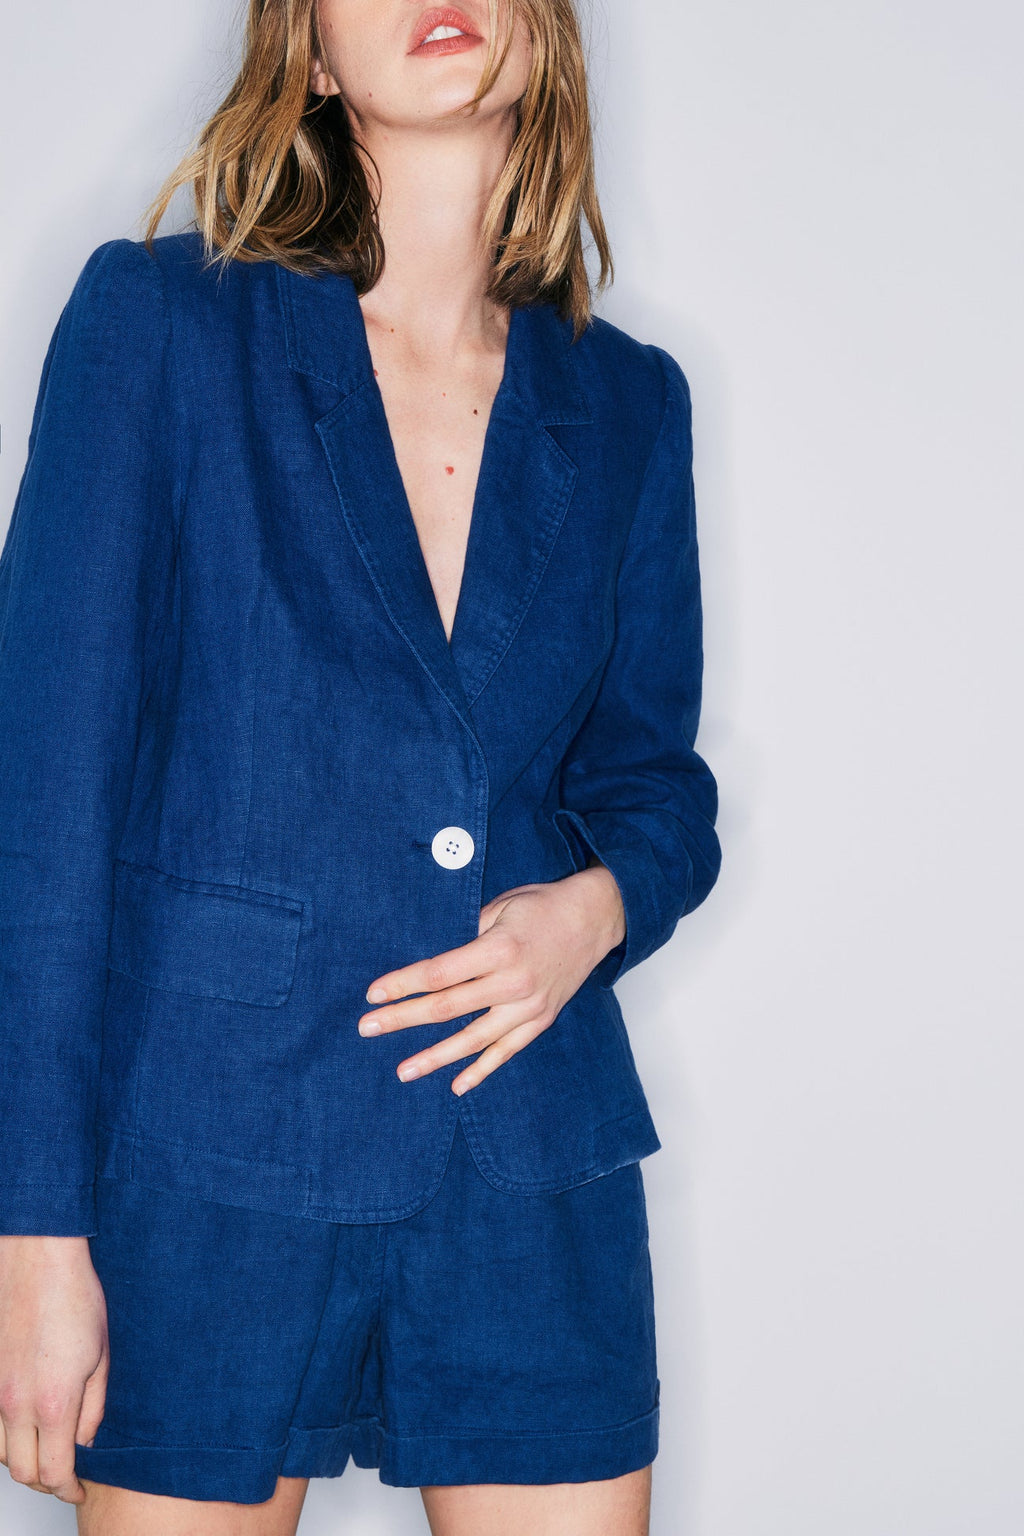 Detailed view highlighting button closure, long sleeves, and a notched collar of the Melissa Nepton Glen Blazer in elegant Batik Blue.